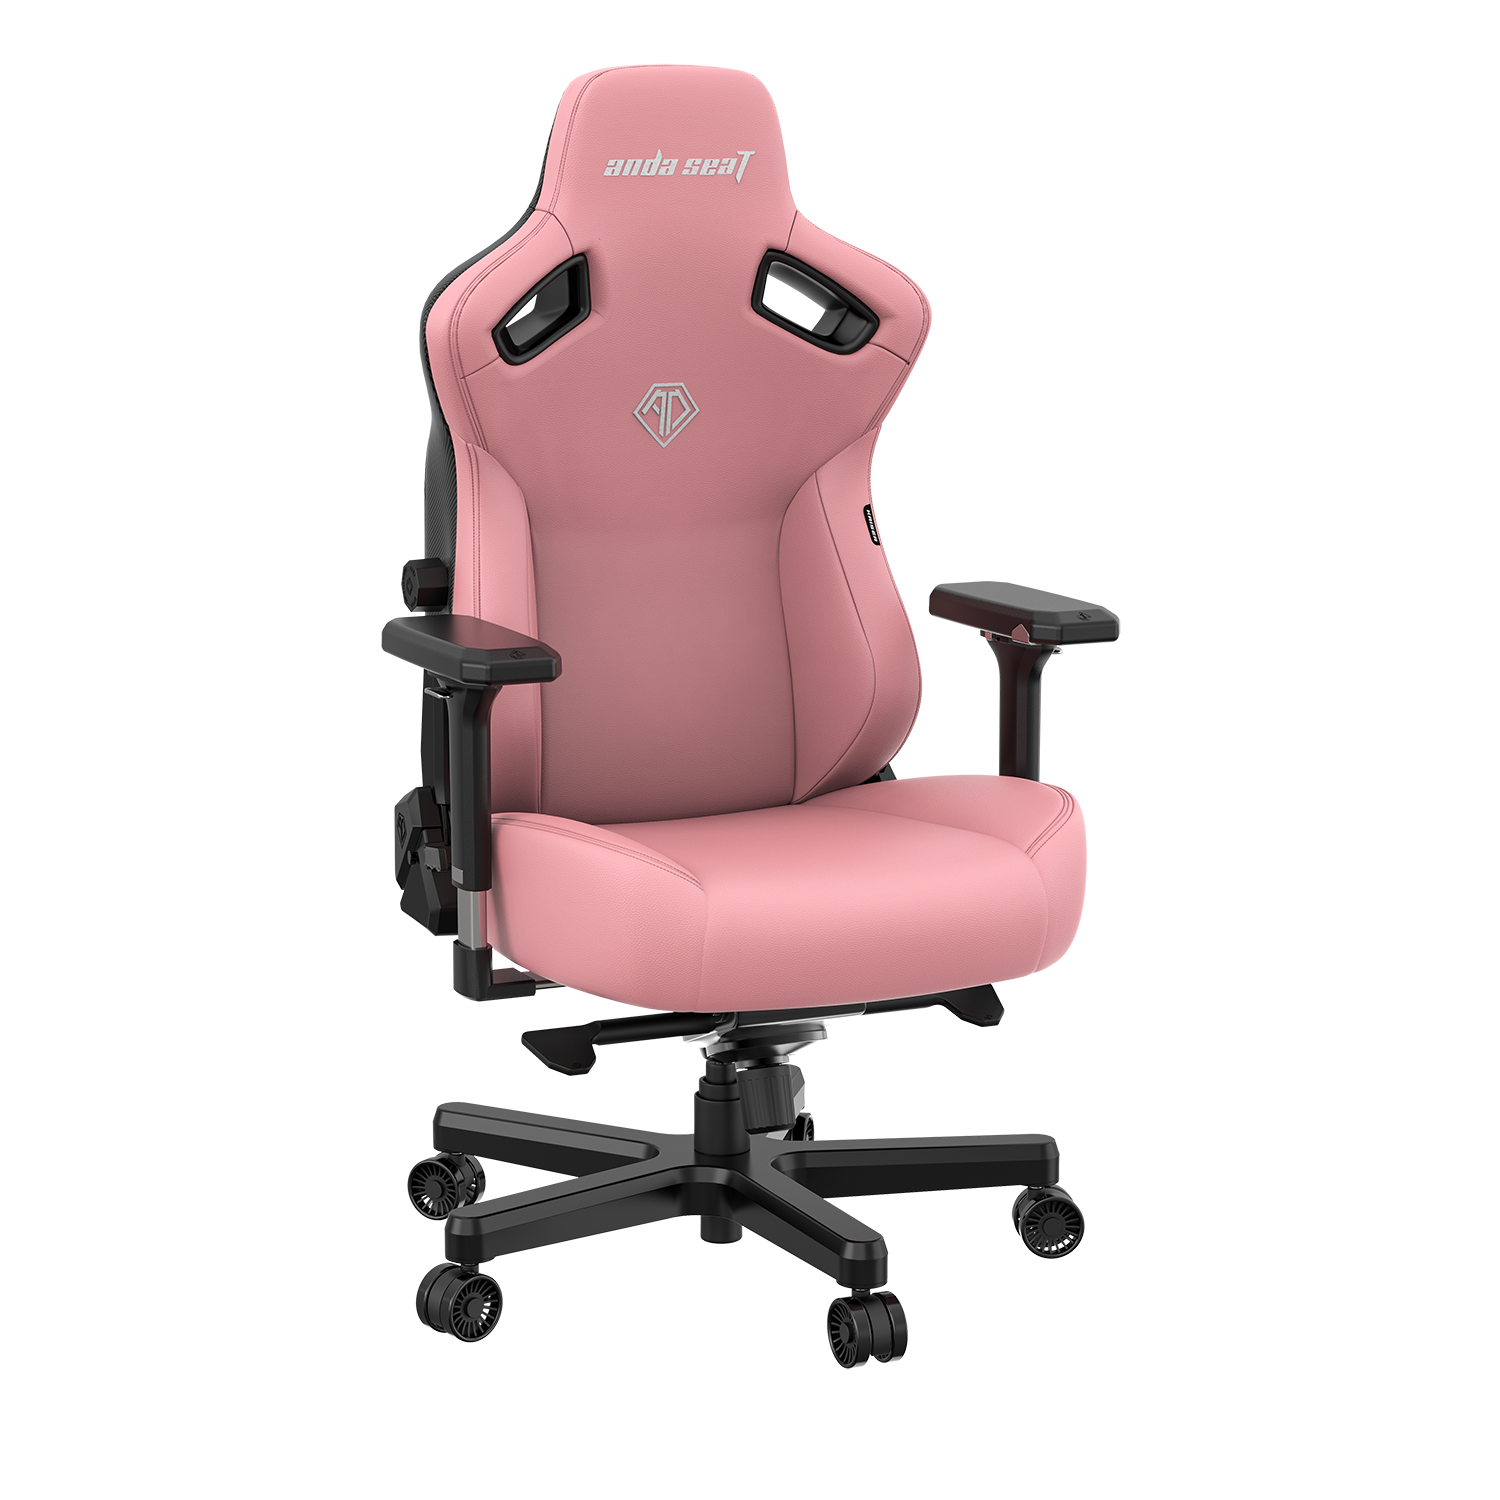 ANDA SEAT KAISER 3 XL SIZE DURAXTRA  LEATHERETTE - CREAMY PINK